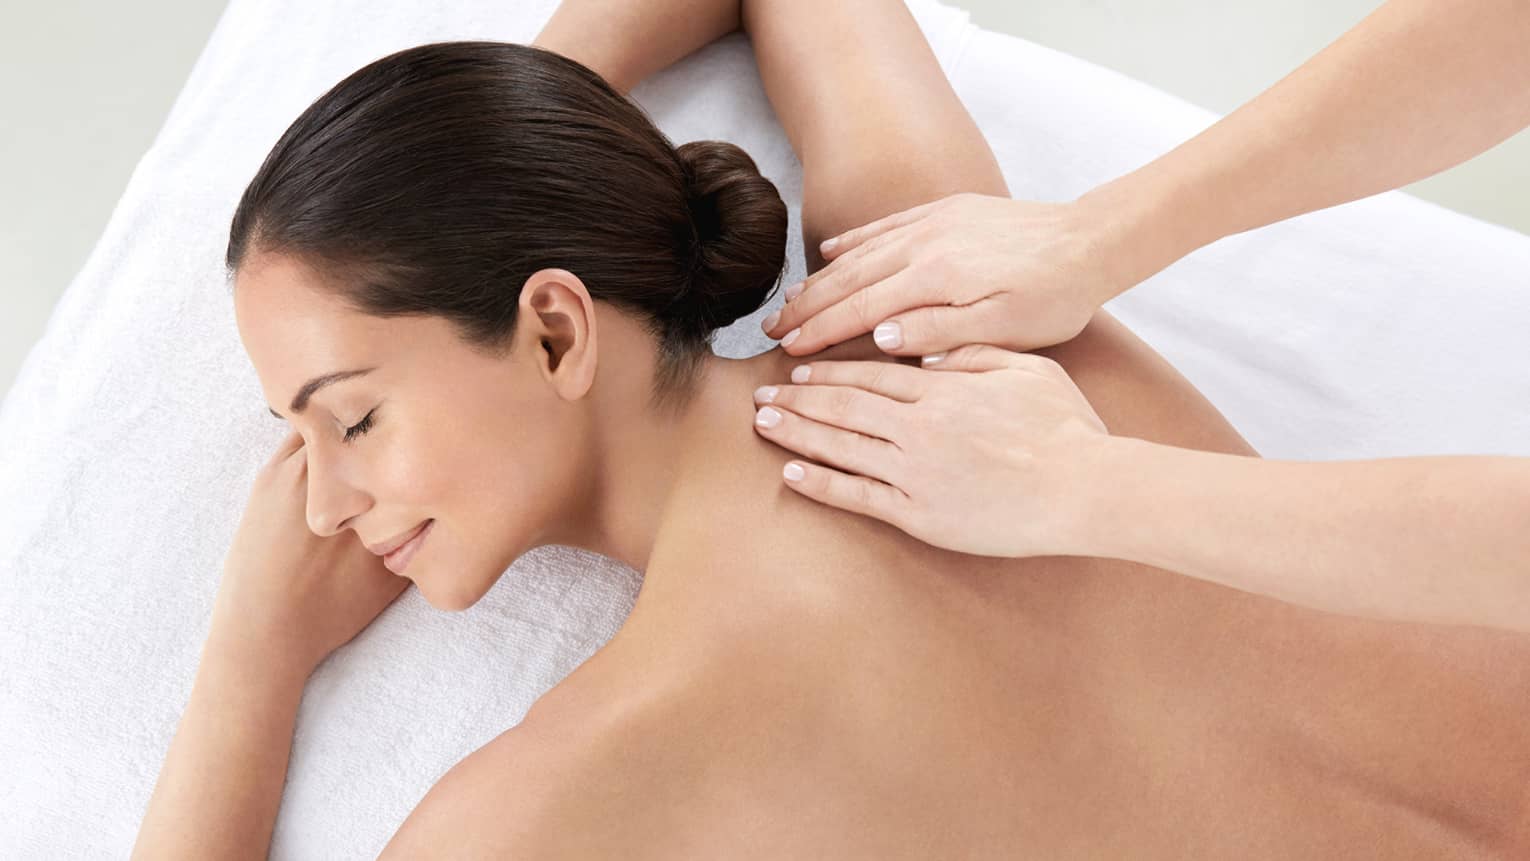 Woman smiles, lies on massage table as hands massage bare shoulders